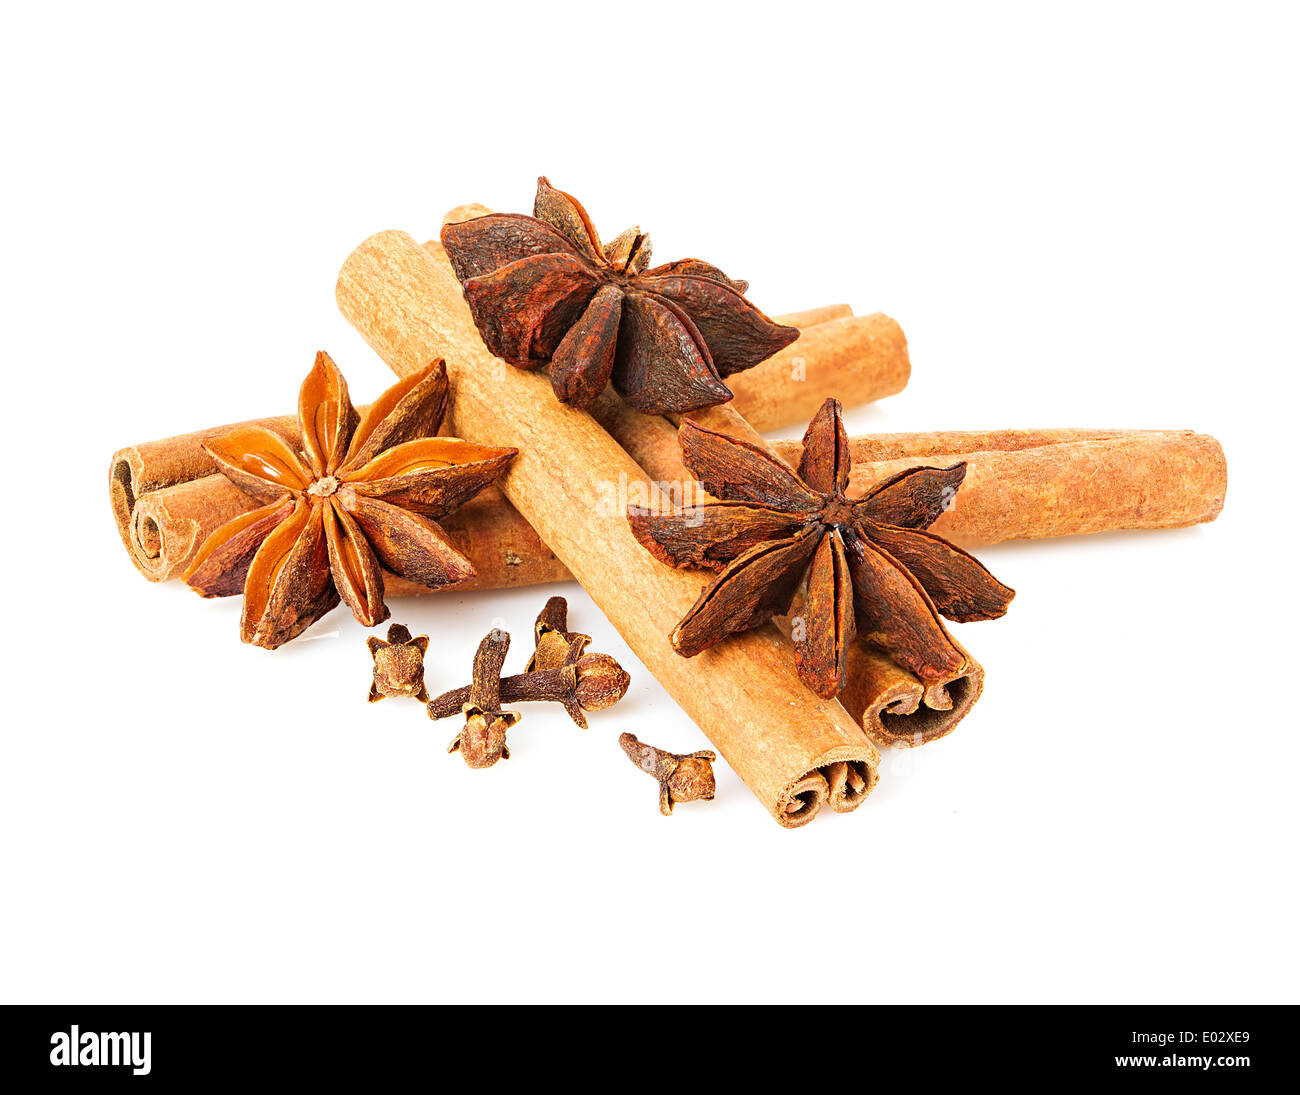 Anise, cinnamon and cloves isolated Stock Photo